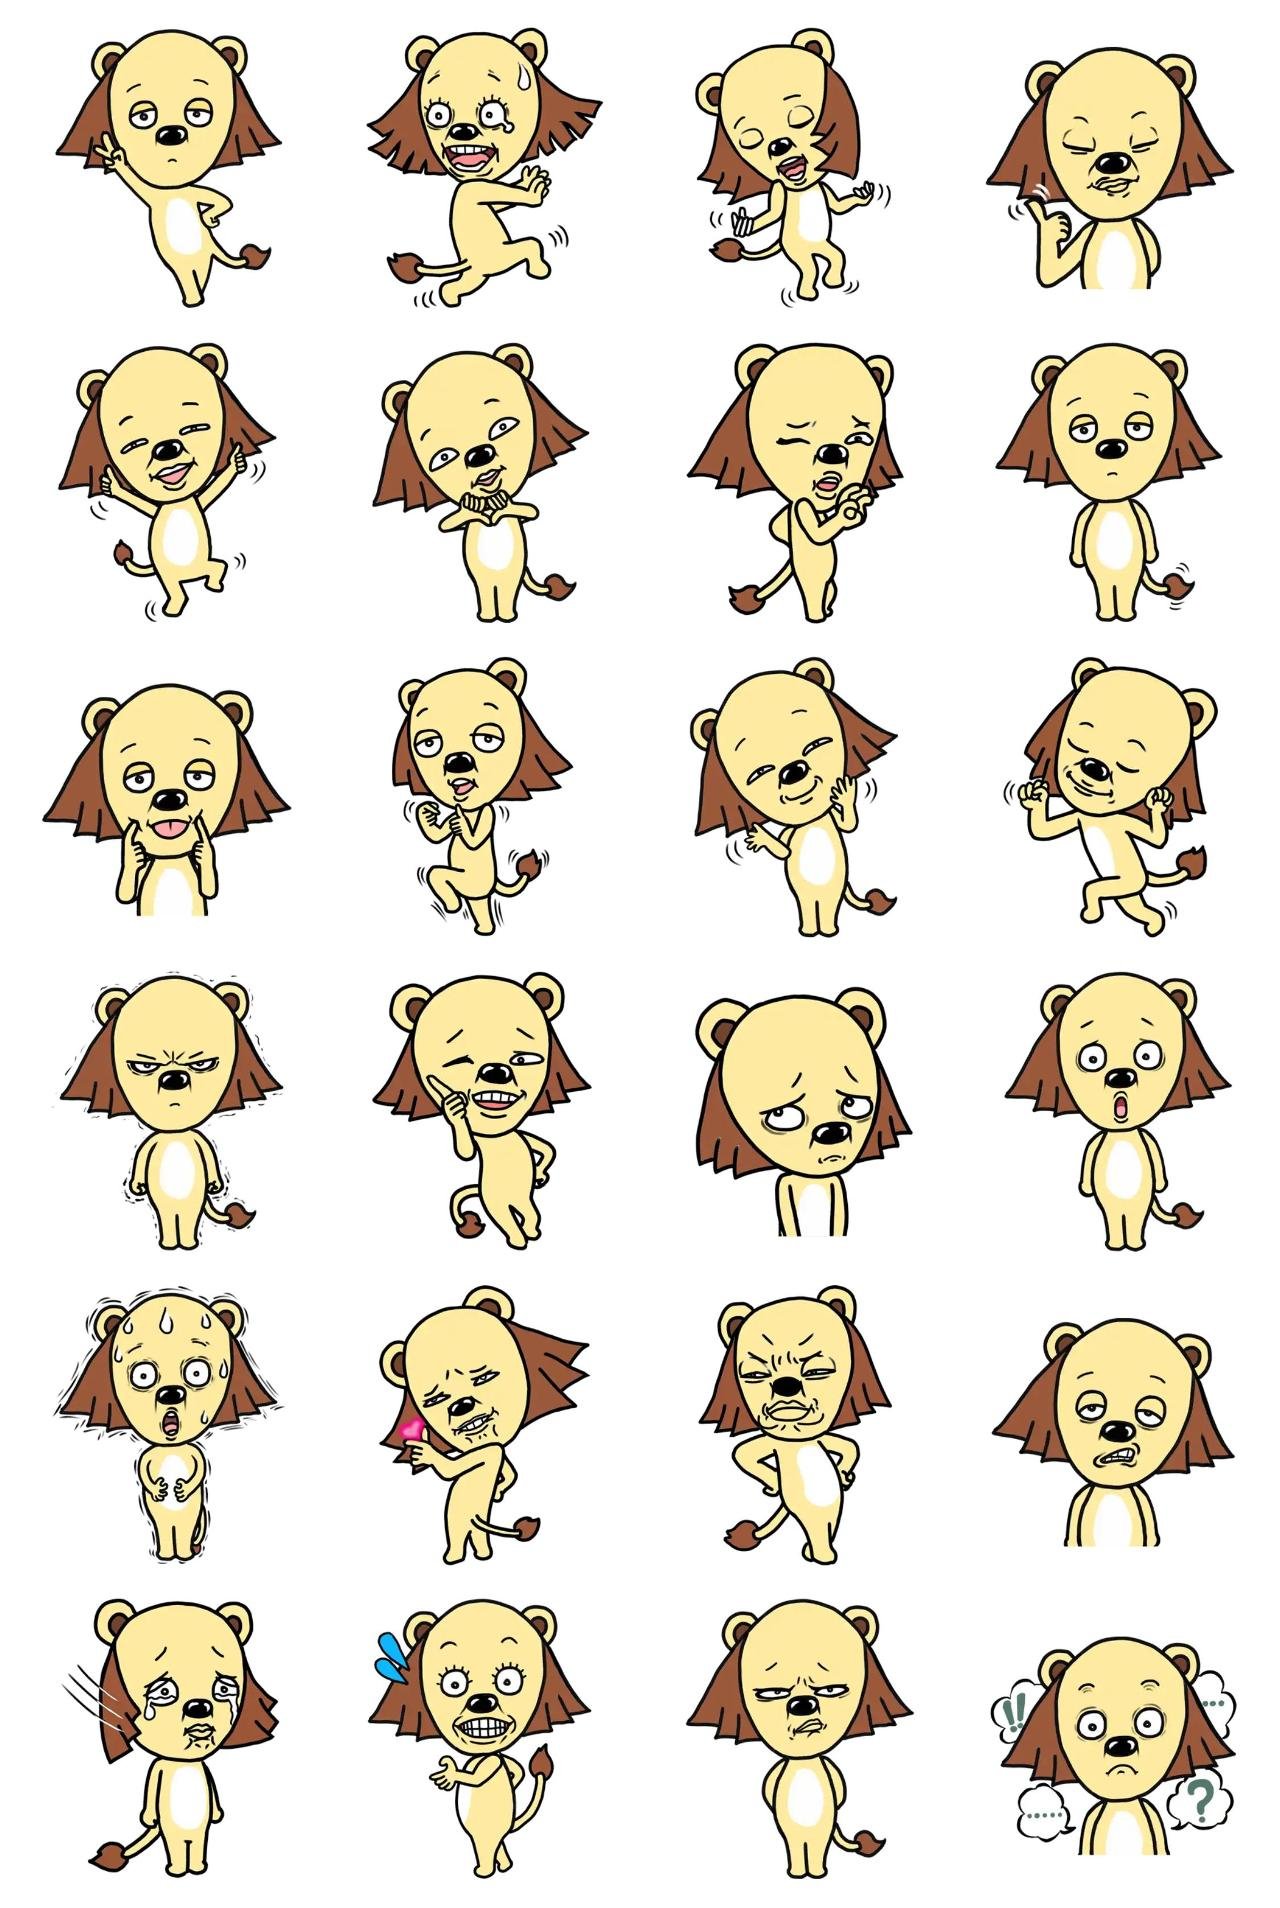 Happy Bald Lion Roy 2 Animals sticker pack for Whatsapp, Telegram, Signal, and others chatting and message apps